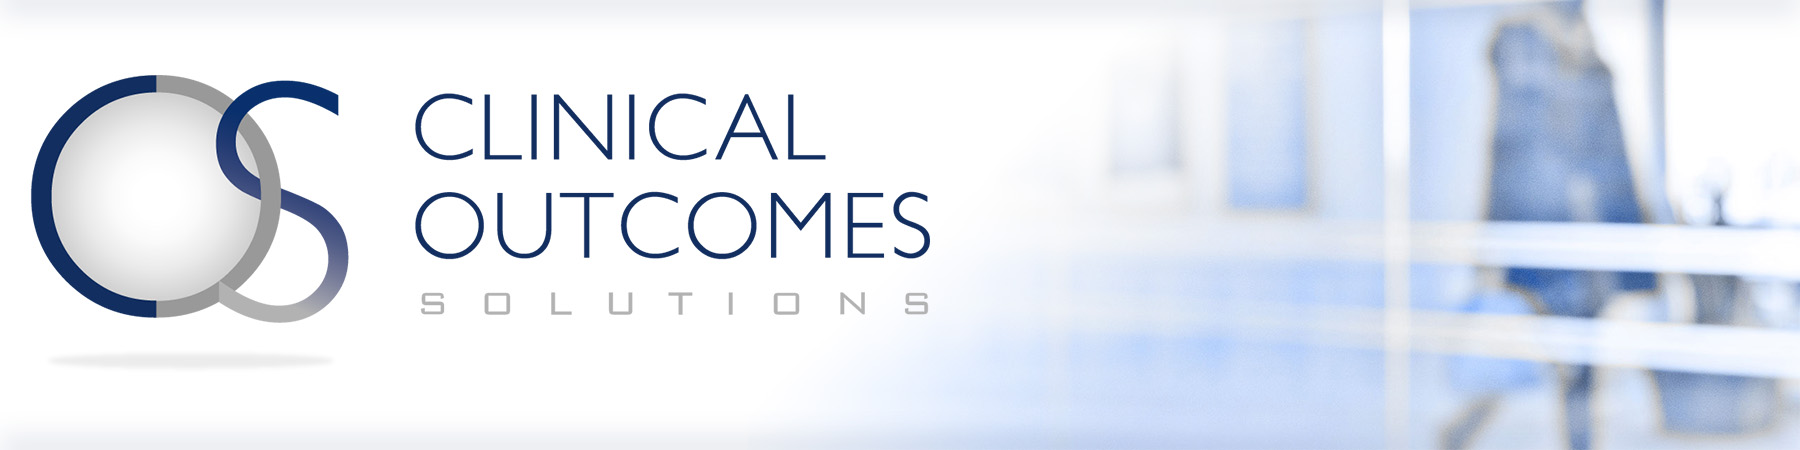 Clinical Outcomes Solutions